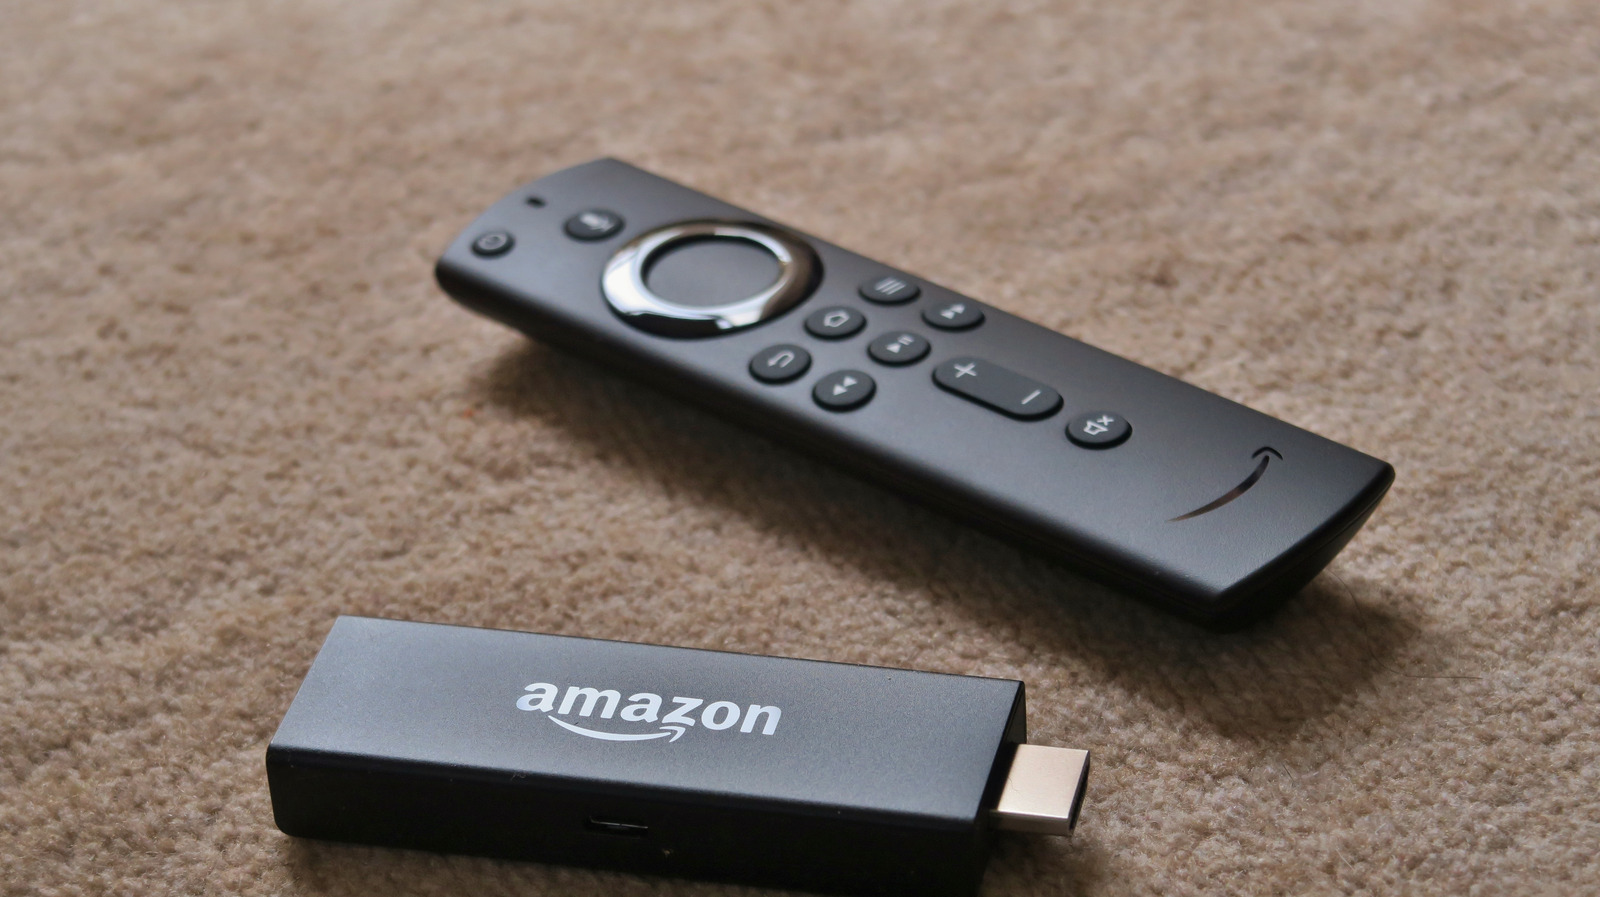  Finding content on Fire TV:  Devices & Accessories